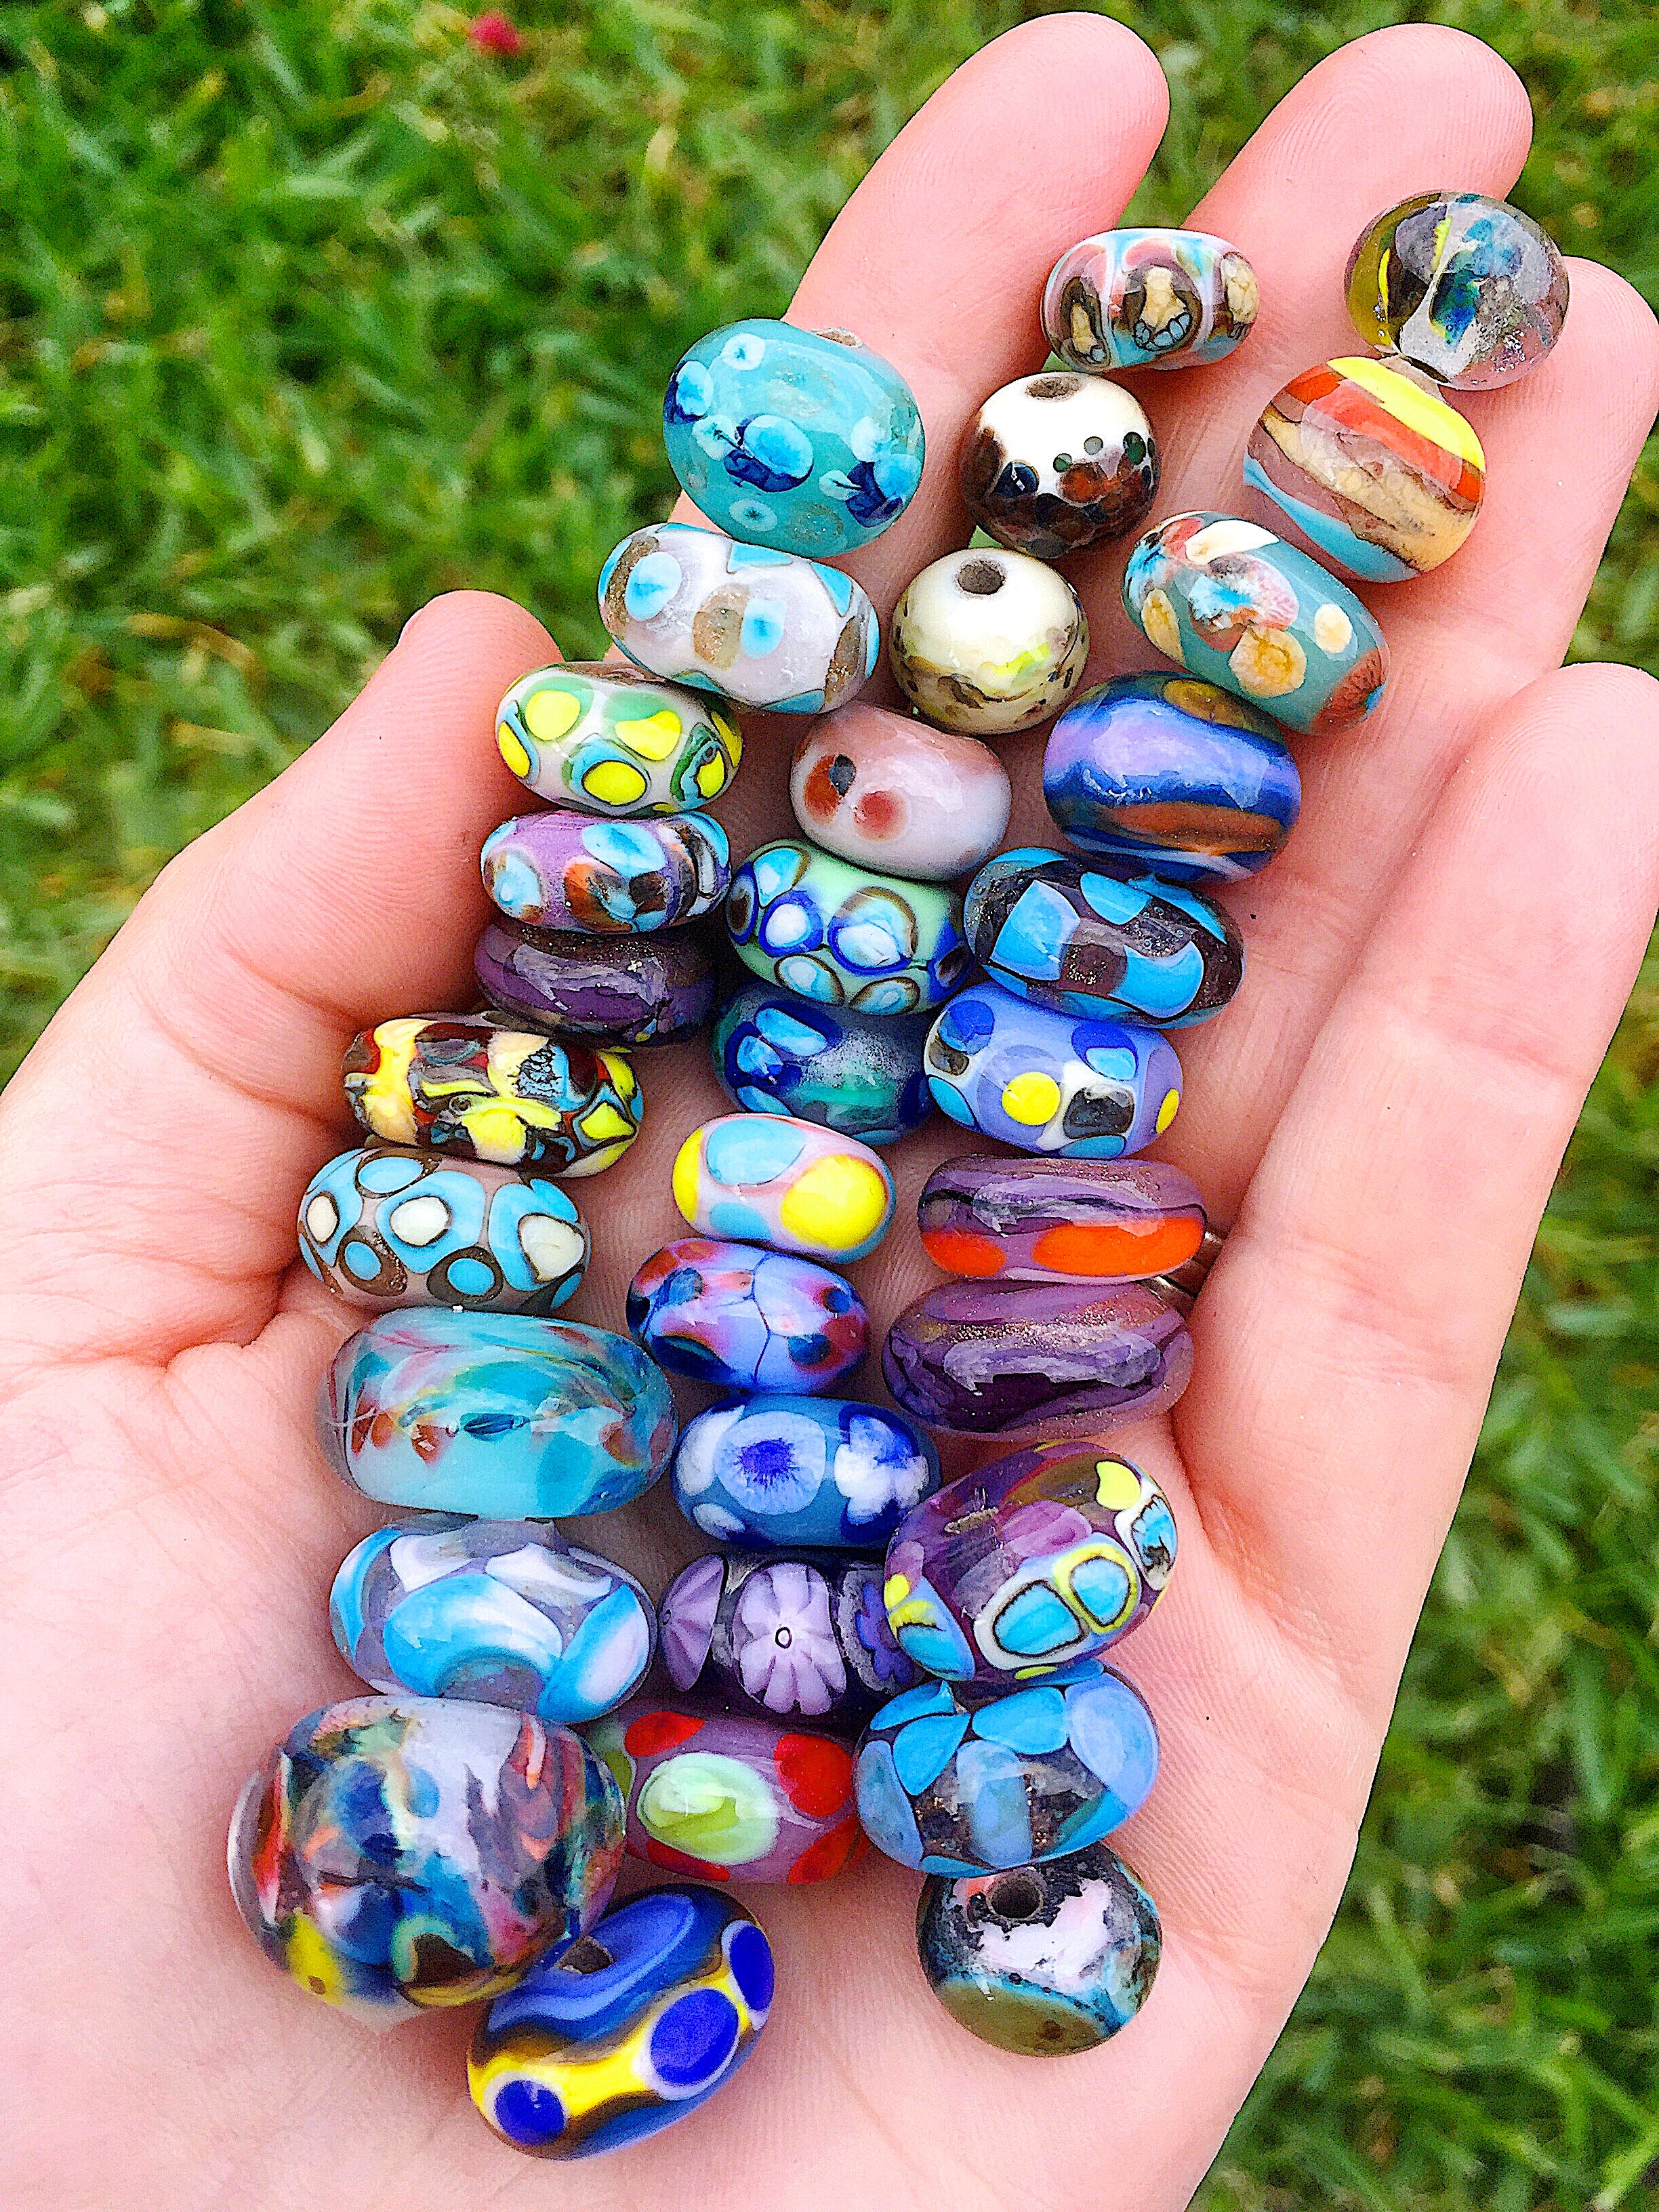 Set of 5 Colorful Handcrafted Lampwork Glass Beads with Bright Swirls and stripes in fun summer colors